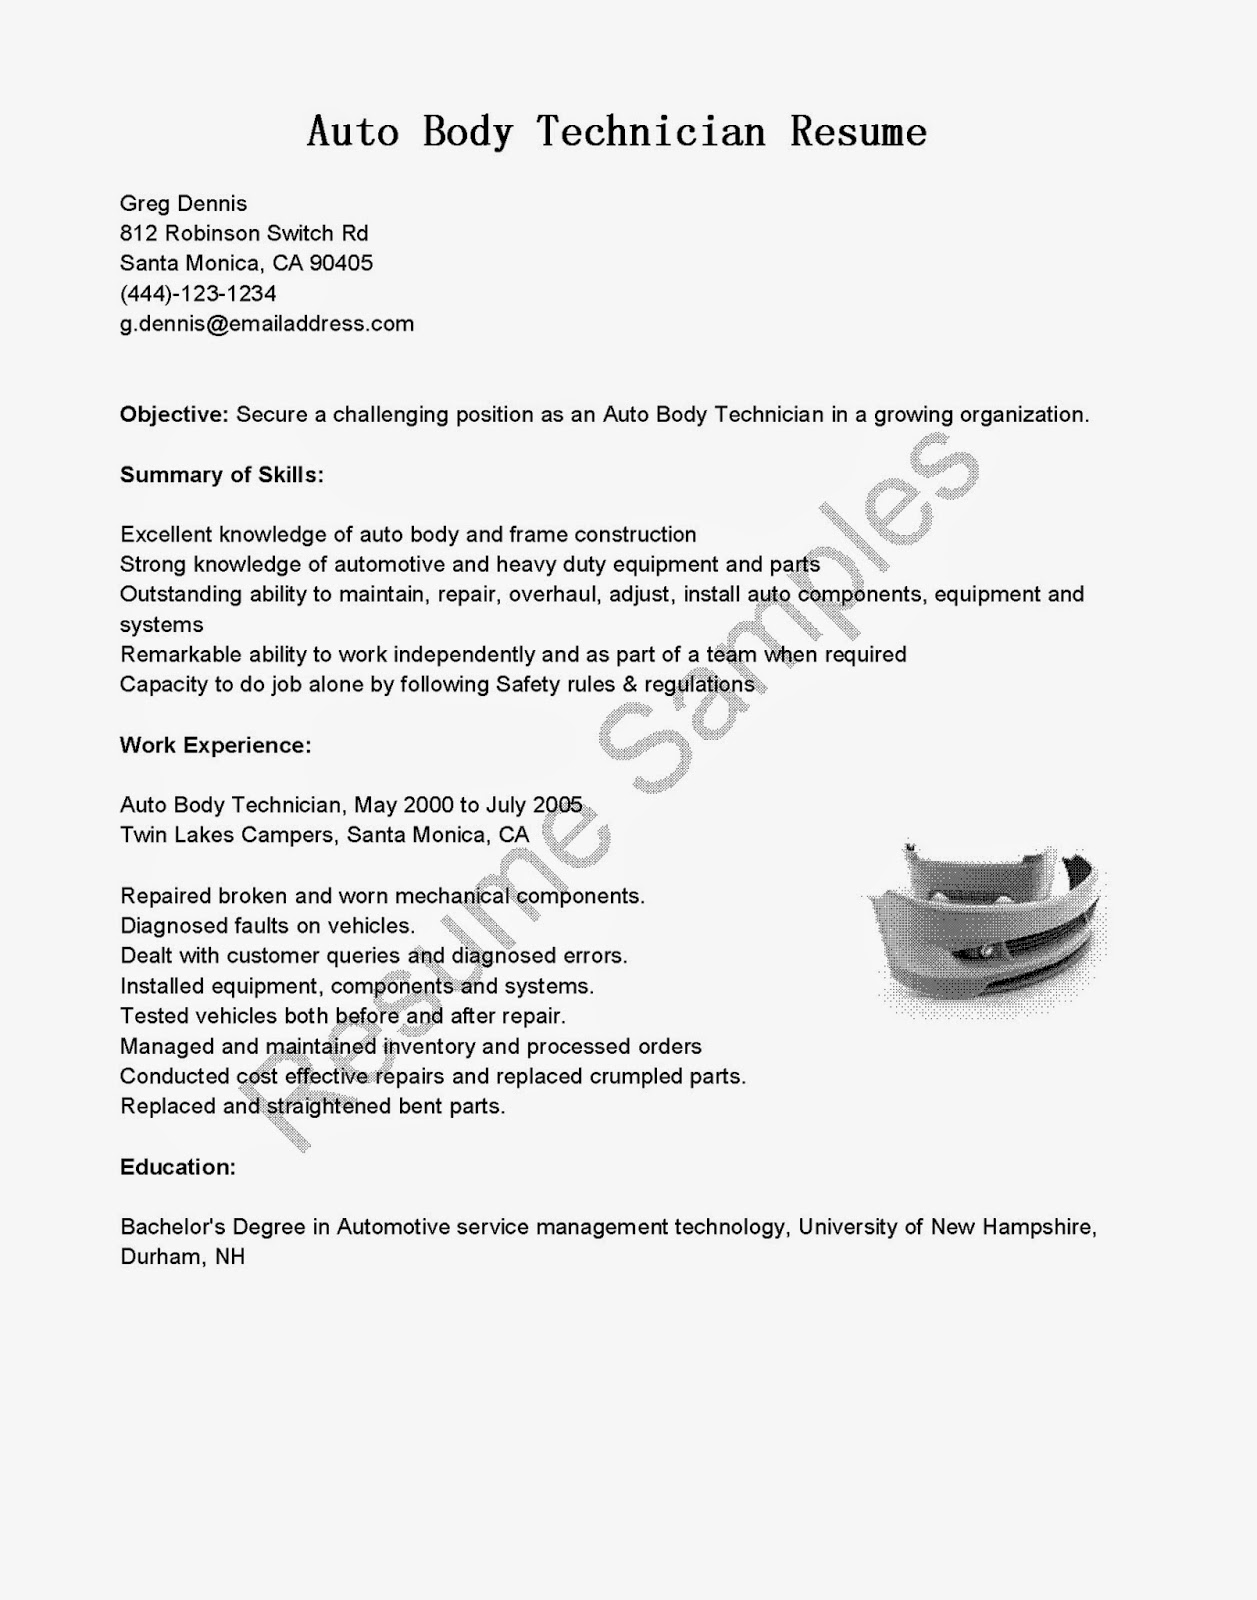 Automatic resume posting software